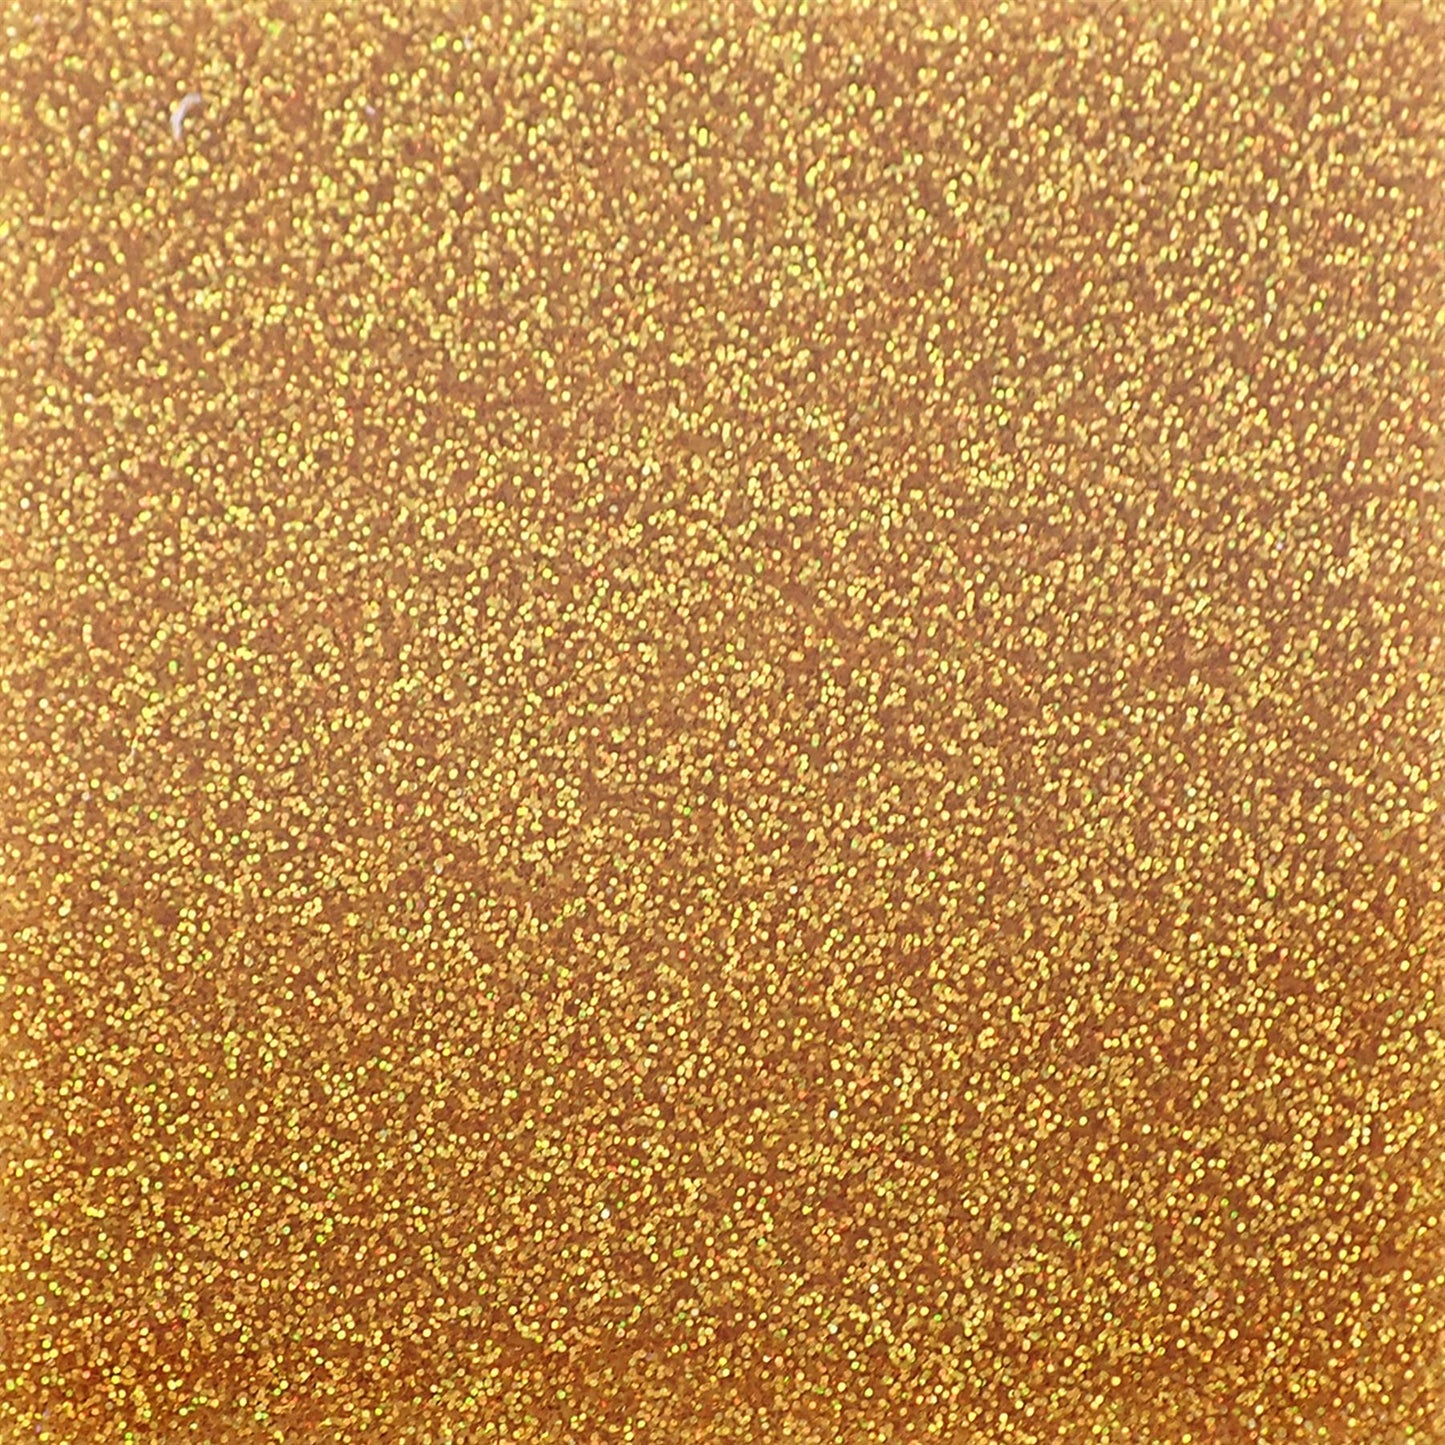 Incudo Dark Gold 2-Sided Holographic Glitter Acrylic Sheet - 98x98x3mm (3.9x3.86x0.12"), Sample